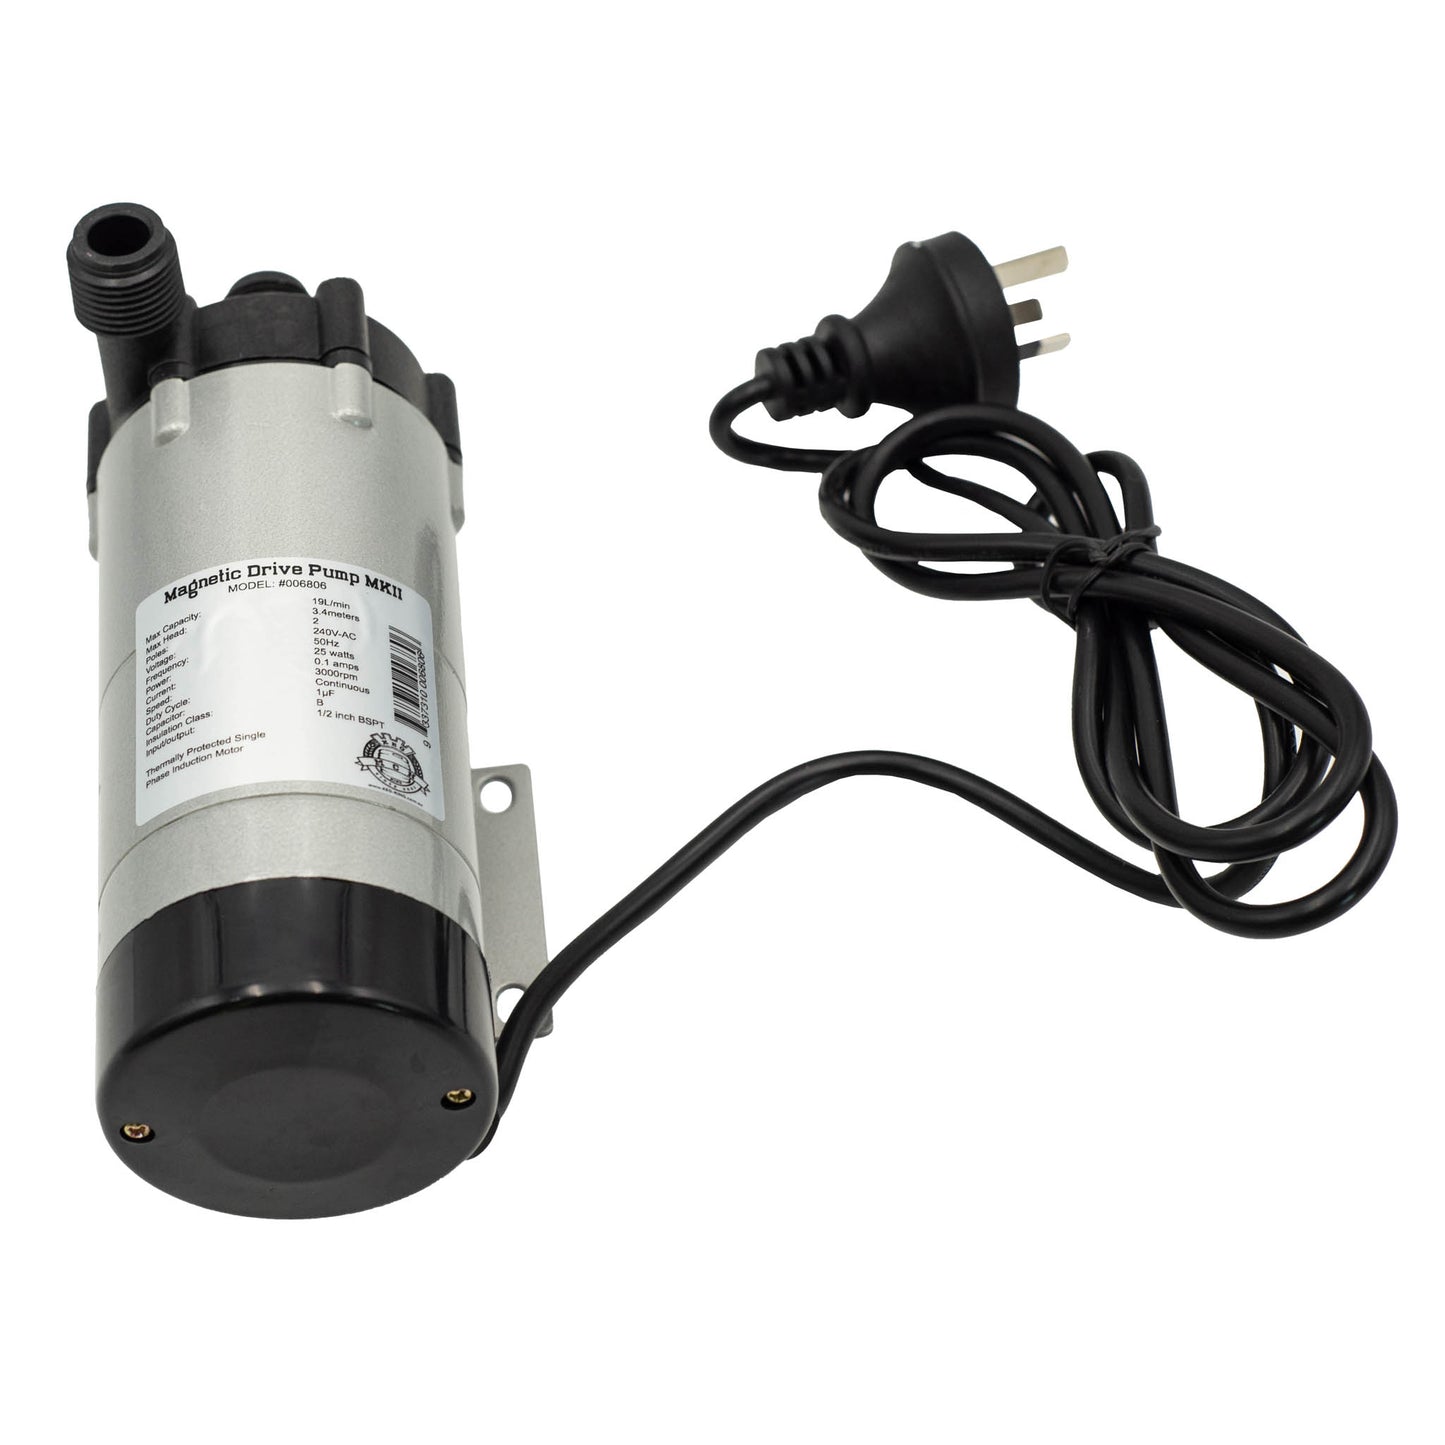 Magnet drive pump MKII model and specifications. Made from polysulfone as it is a tough, food-grade plastic rated up to 120C.